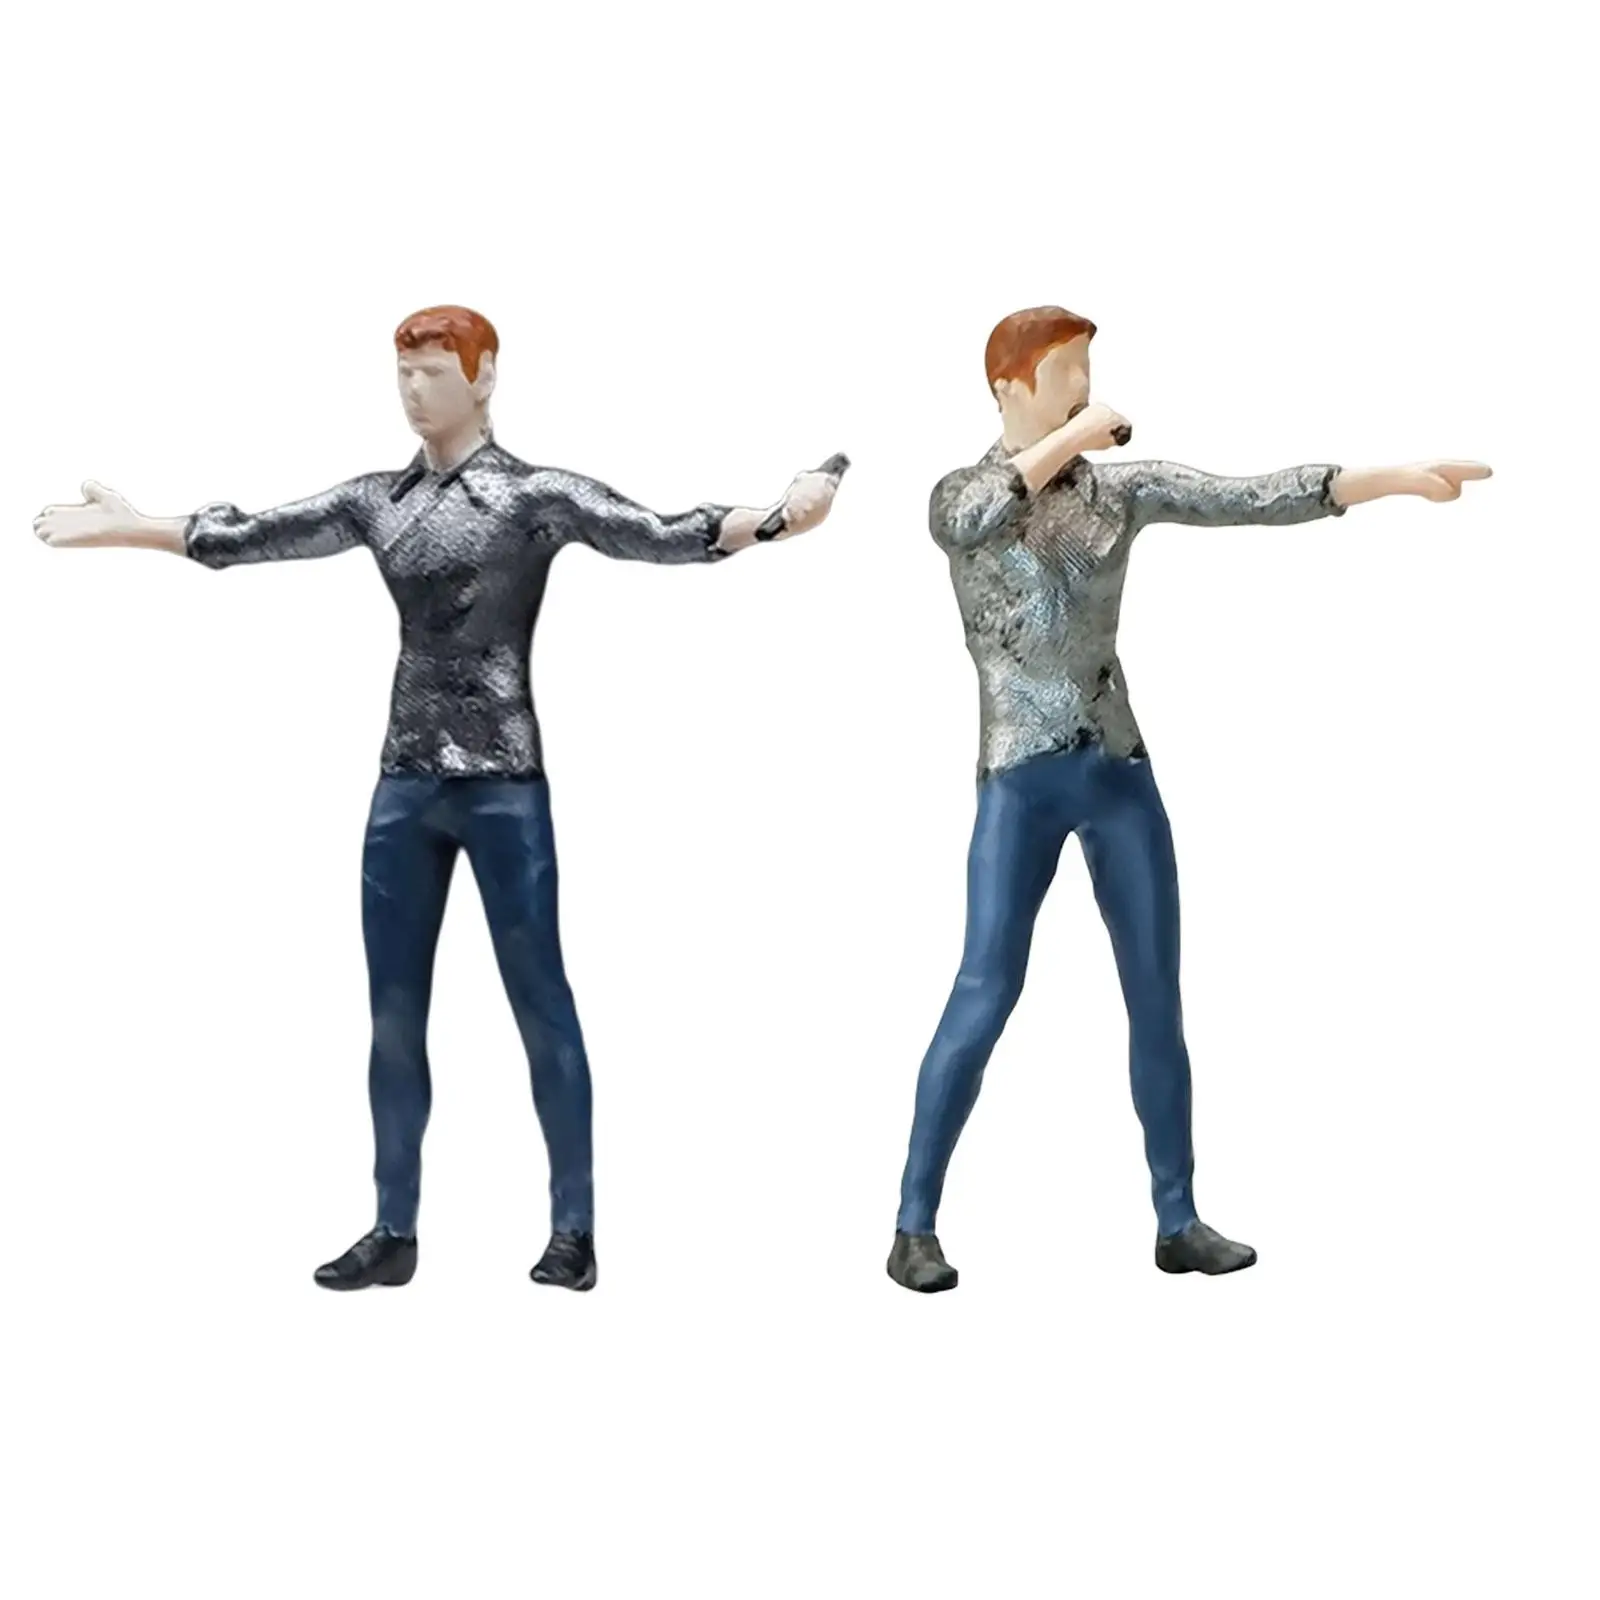 1/64 Male Singer Figures Tiny People Model Model Trains People Figures for DIY Scene Diorama Photography Props Layout Decoration